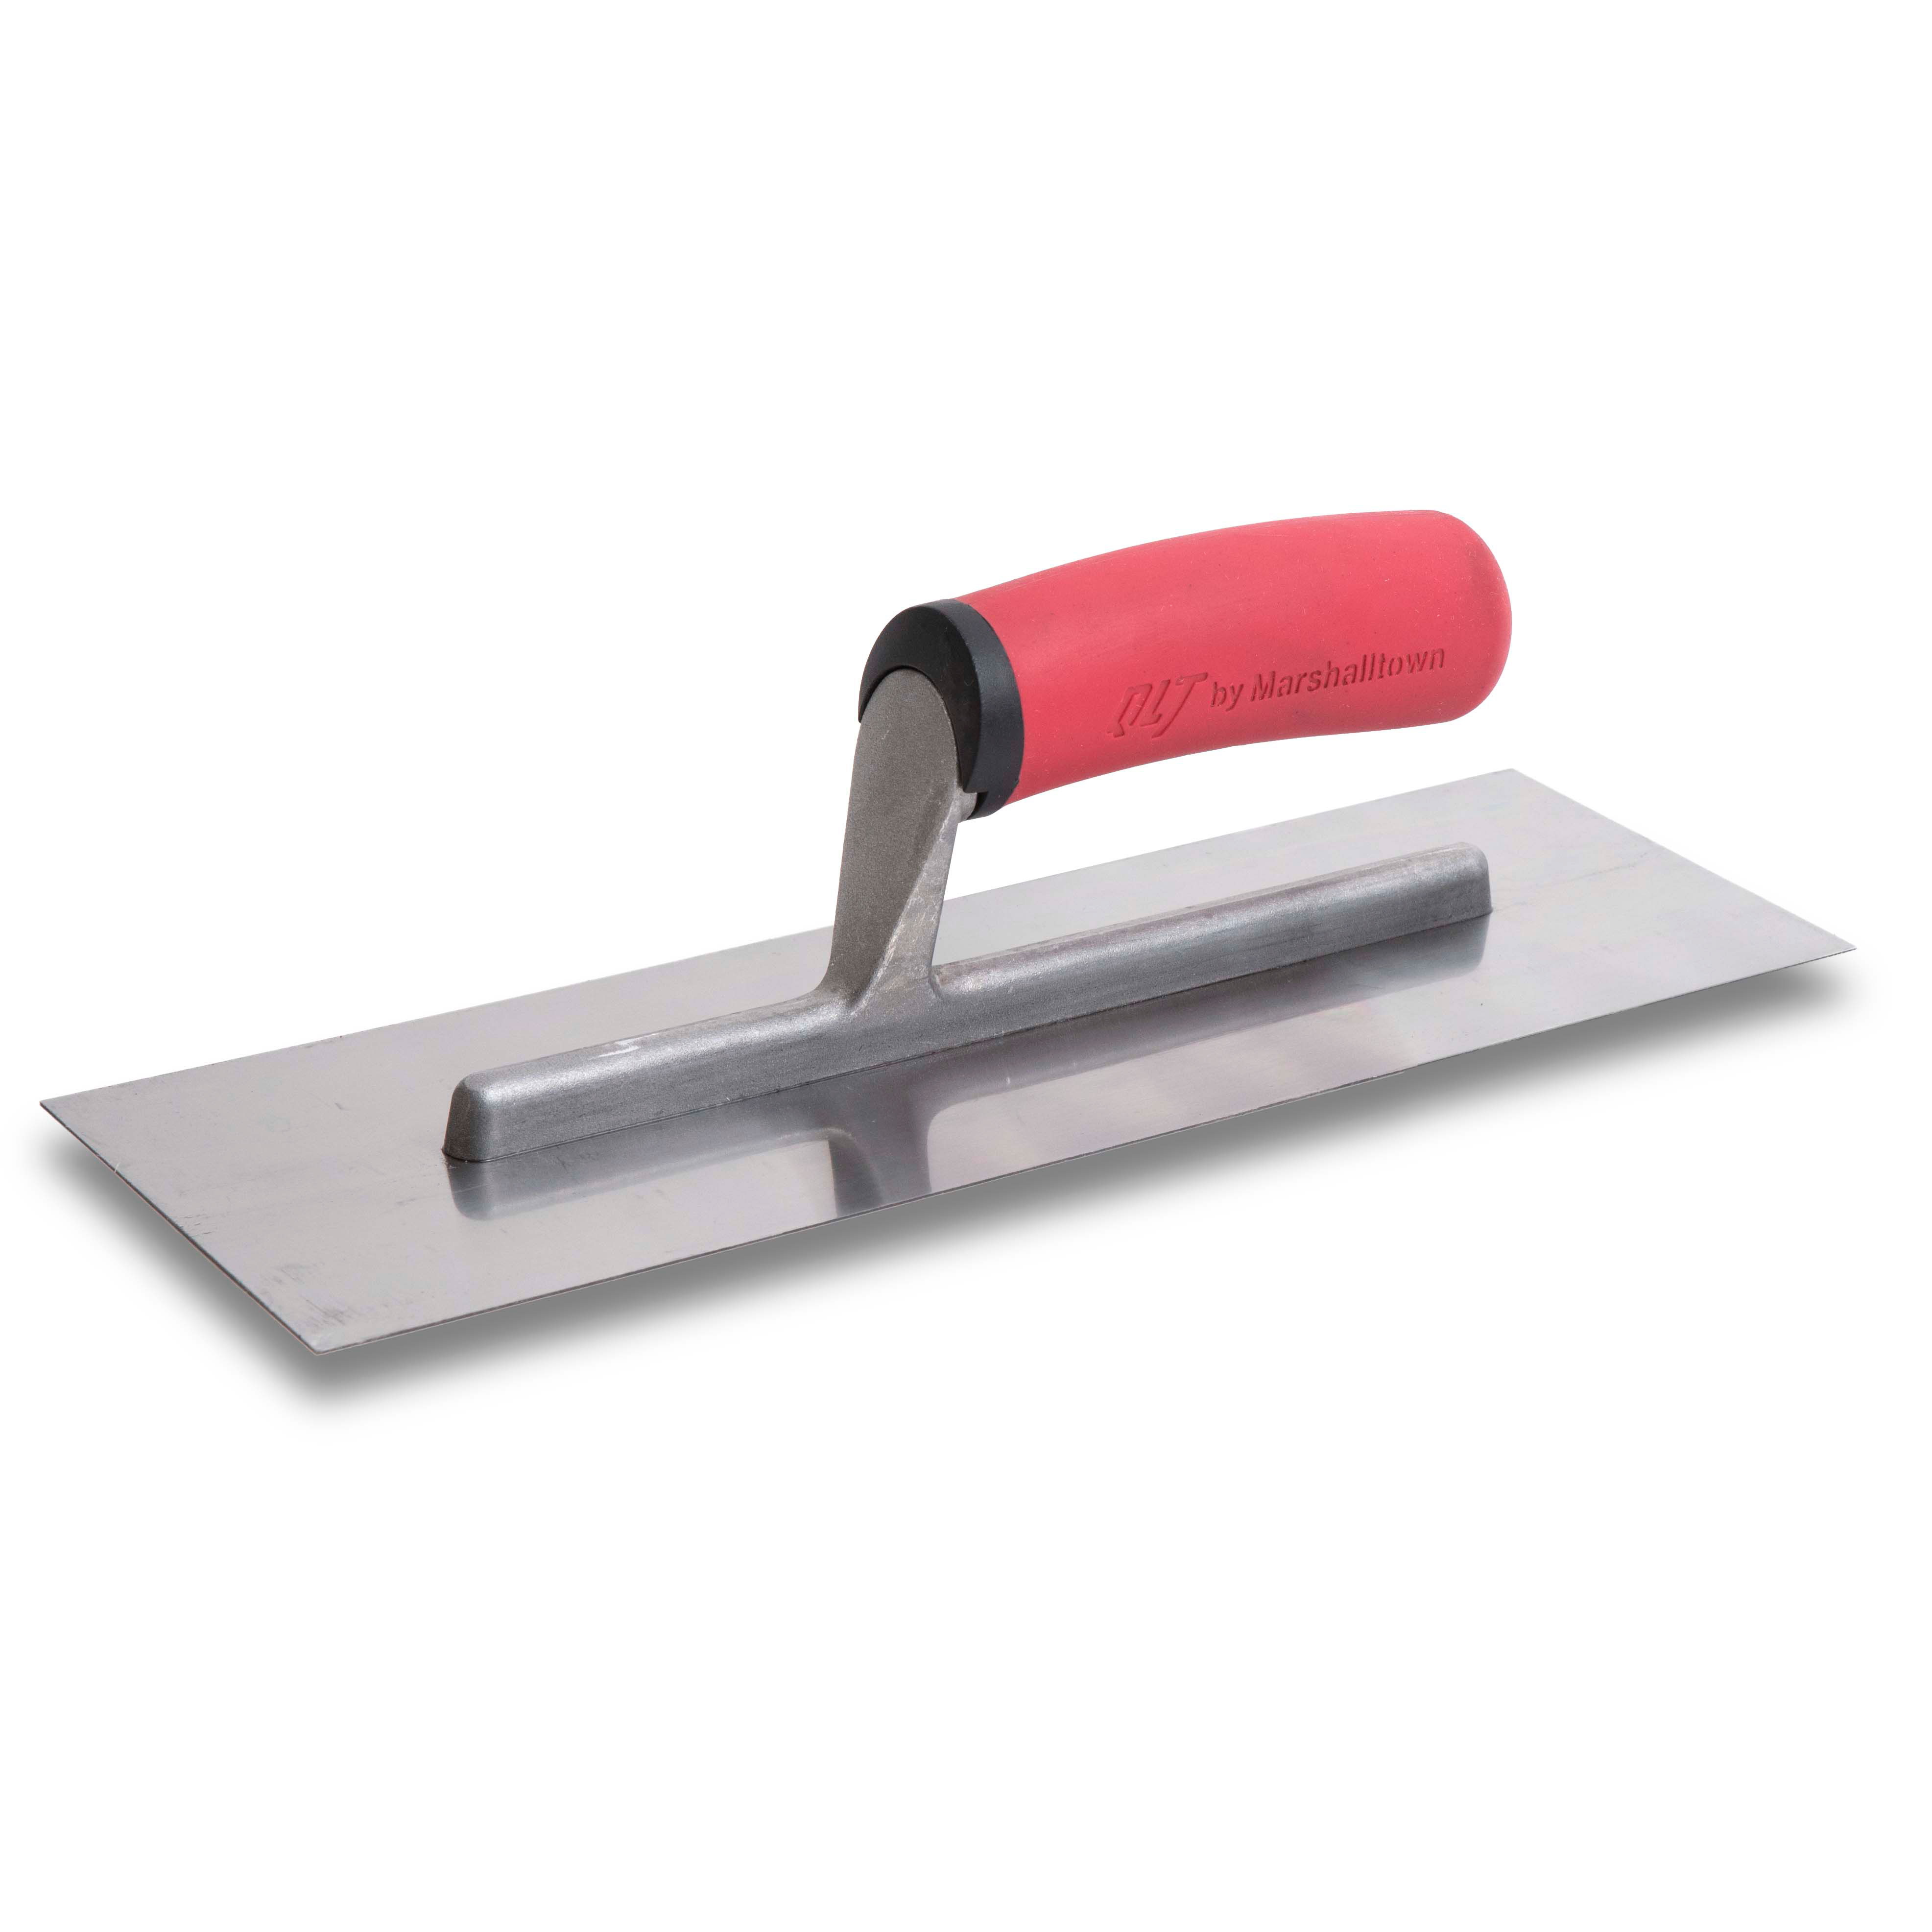 Marshalltown FT124SS 12in x 4in Stainless Finishing Trowel with Soft Grip Handle FT124SS